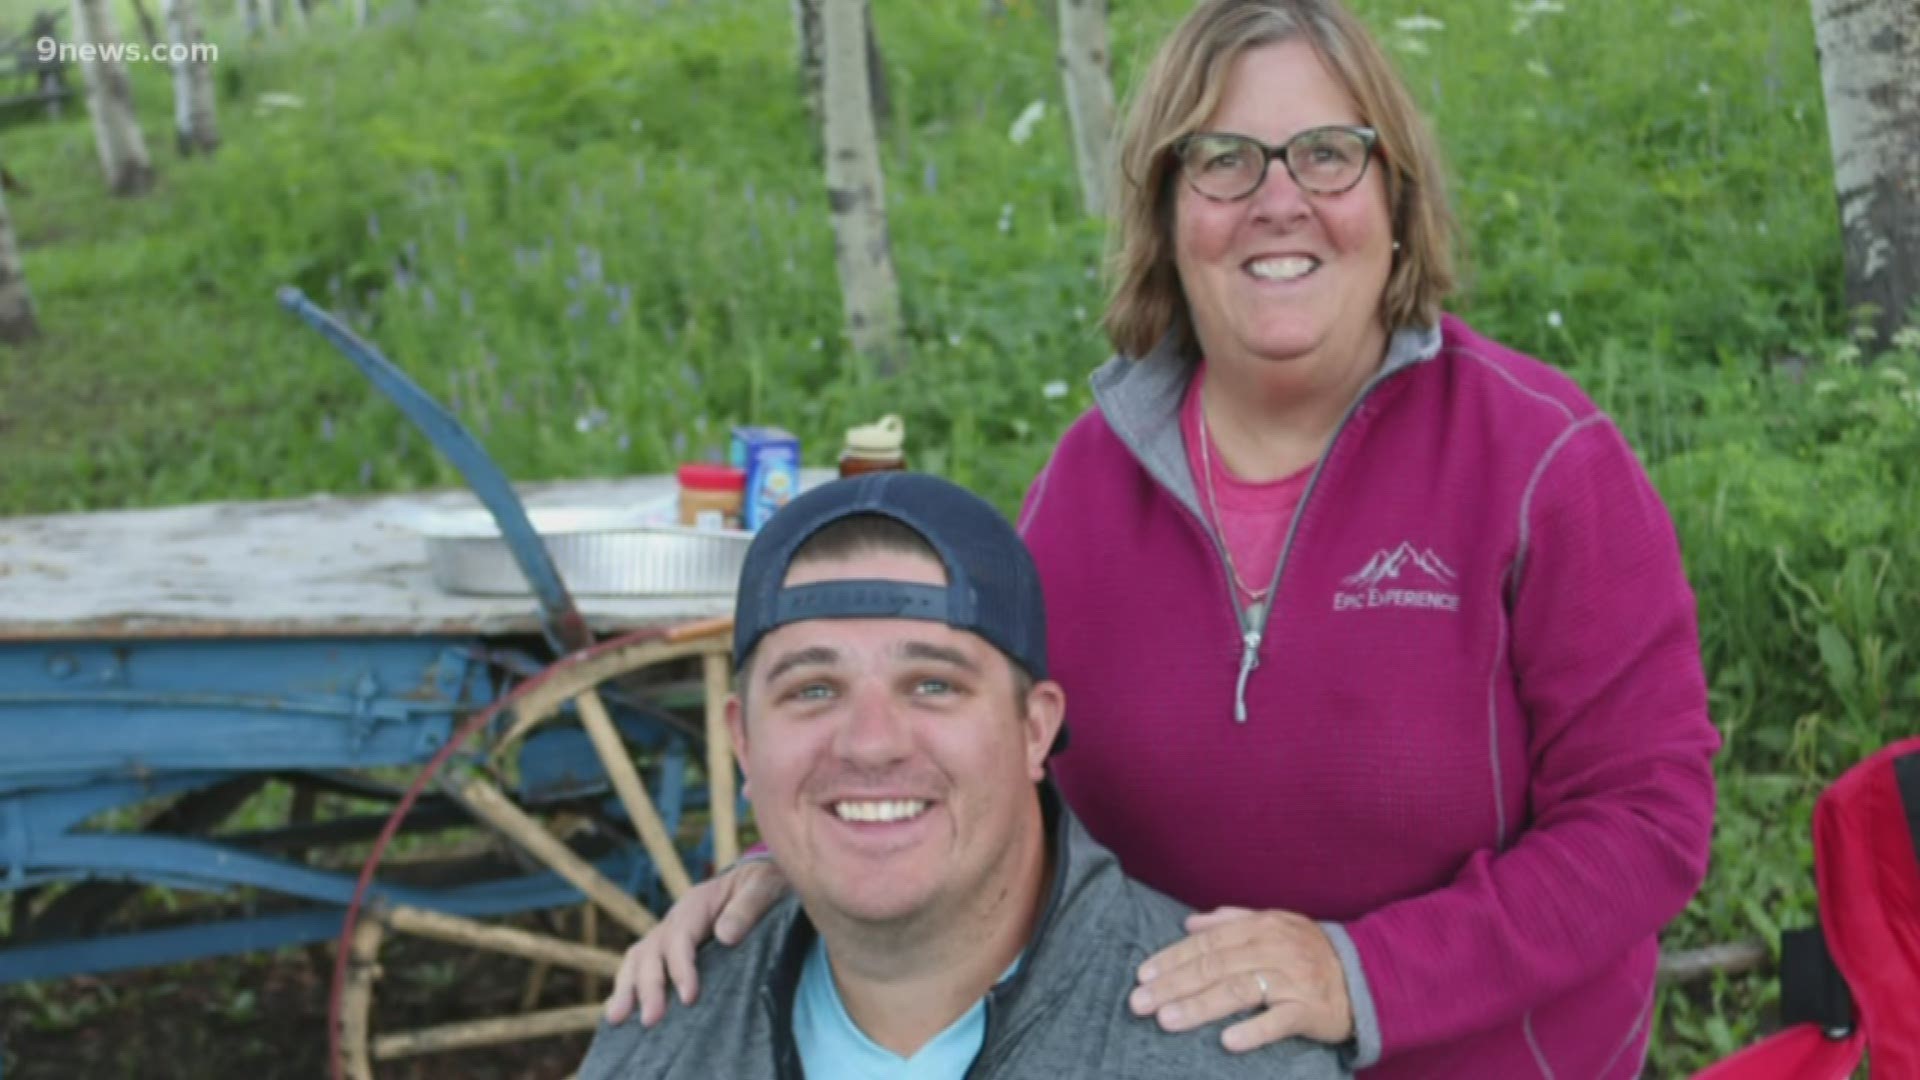 Horseback riding is just one way this mother and son team are bringing new experiences and new connections to cancer survivors.